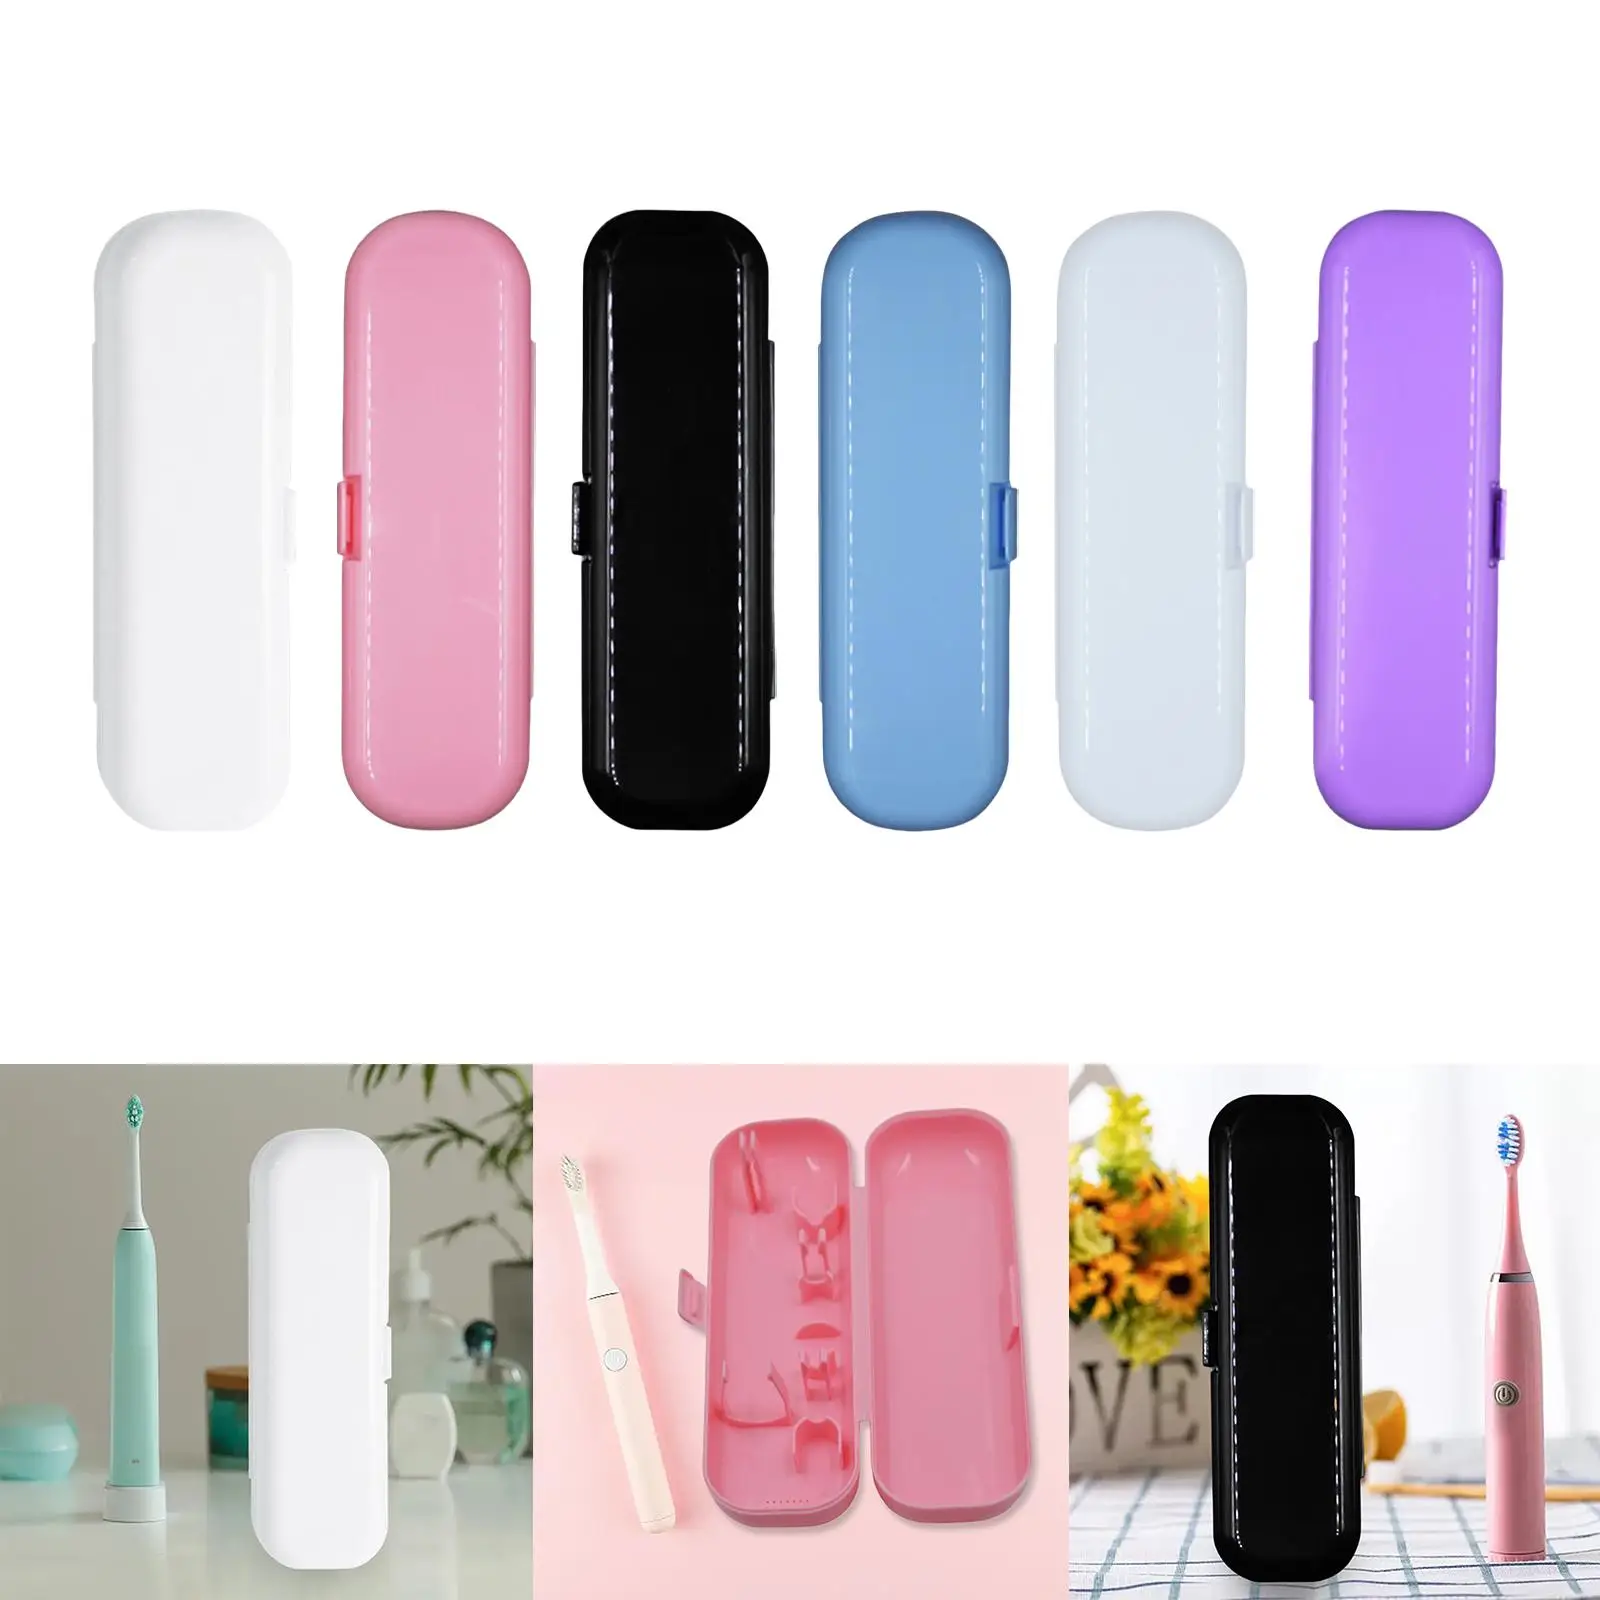 Toothbrush Travel Case Hard Travel Case Electric Toothbrush Holder Snap Design Portable Reusable Stoarge Box for Business